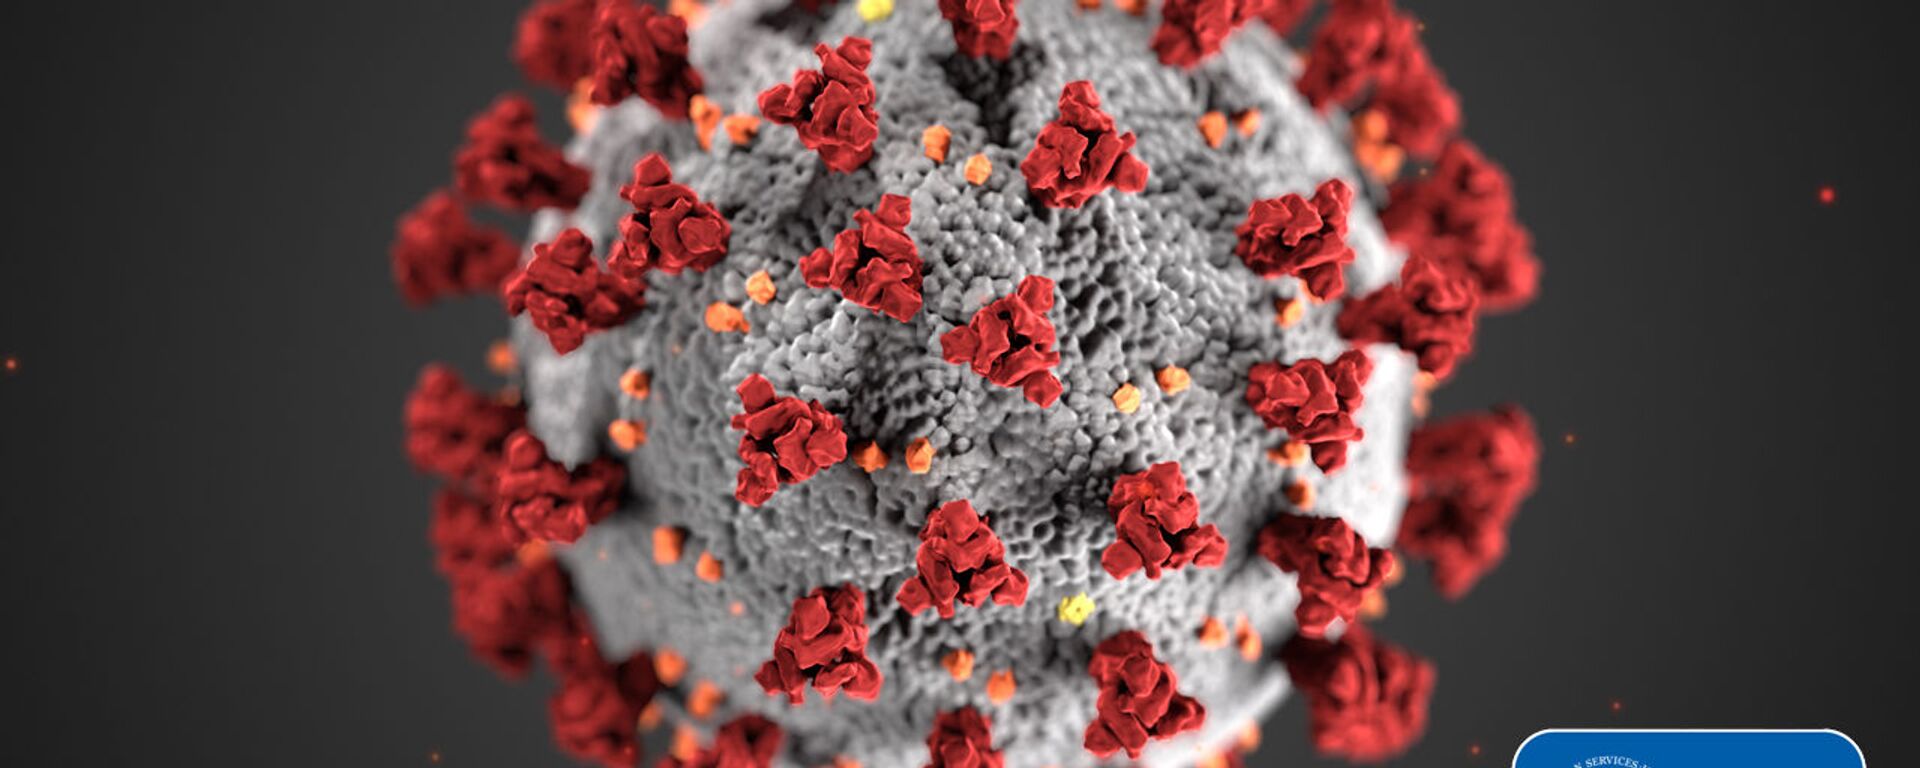 This illustration, created at the Centers for Disease Control and Prevention (CDC), reveals ultrastructural morphology exhibited by coronaviruses. Note the spikes that adorn the outer surface of the virus, which impart the look of a corona surrounding the virion, when viewed electron microscopically. A novel coronavirus, named Severe Acute Respiratory Syndrome coronavirus 2 (SARS-CoV-2), was identified as the cause of an outbreak of respiratory illness first detected in Wuhan, China in 2019. The illness caused by this virus has been named coronavirus disease 2019 (COVID-19). - Sputnik International, 1920, 12.08.2021